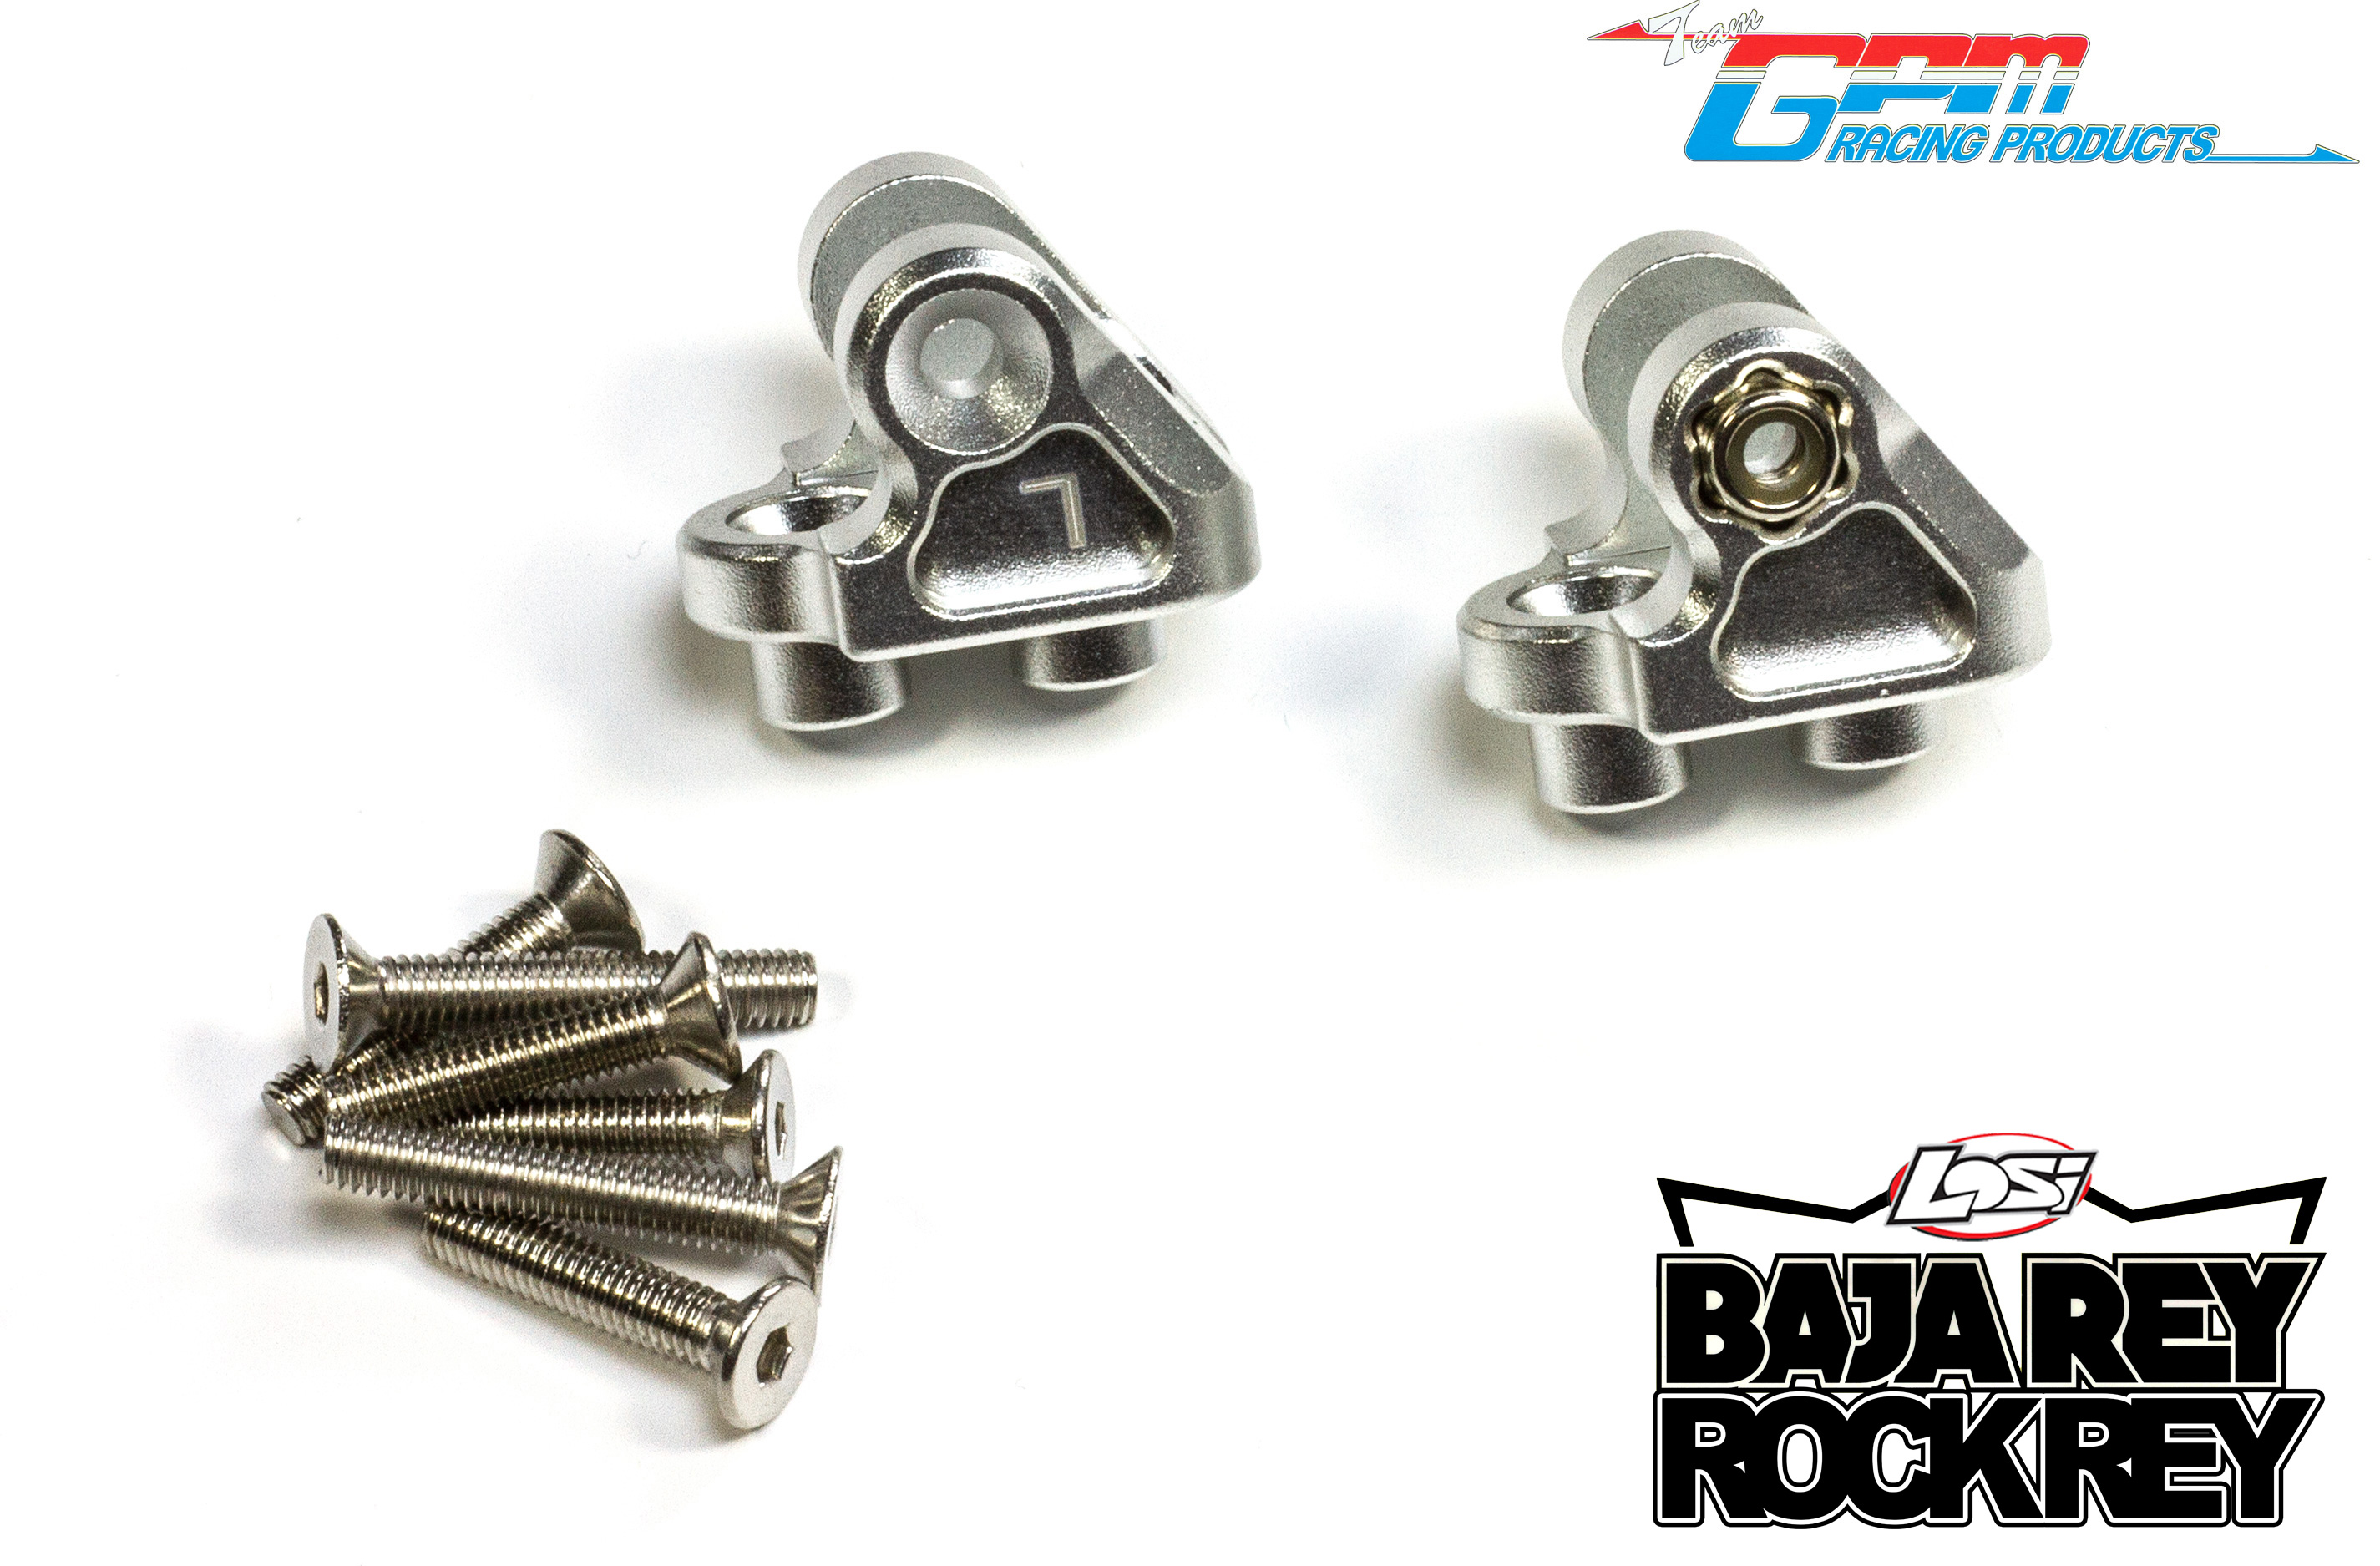 SB008 GPM Aluminum upper trailing arm mounts for Losi Super Baja Rey / 2.0 / Rock Rey, chassis side